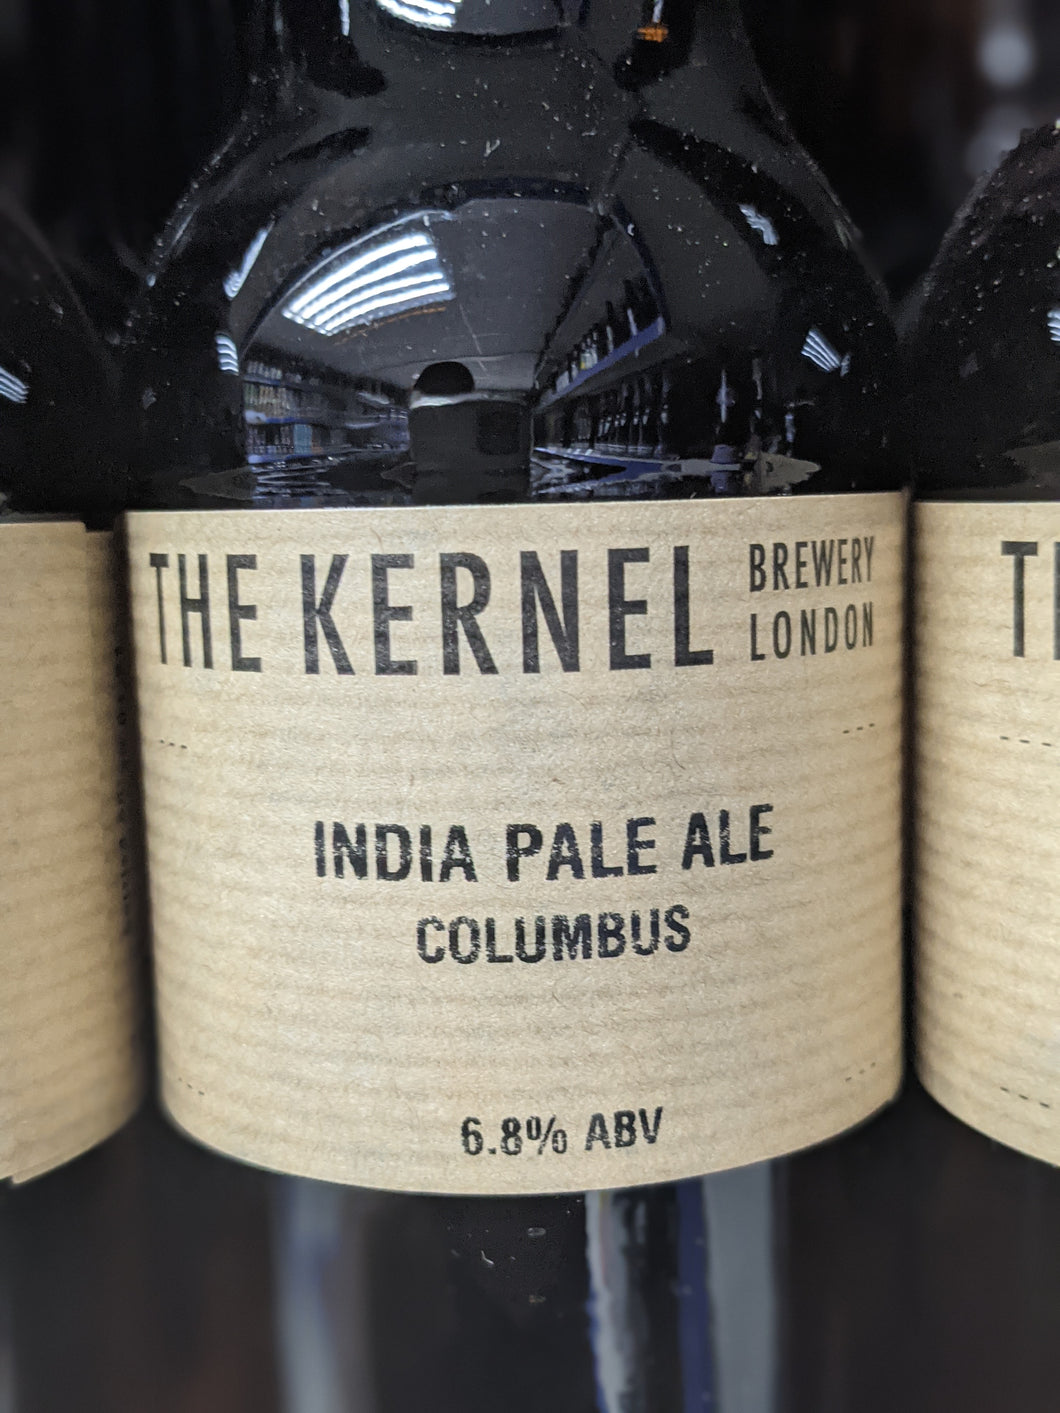 IPA Colombus - The Kernel Brewery - IPA Colombus, 6.8%, 330ml Bottle